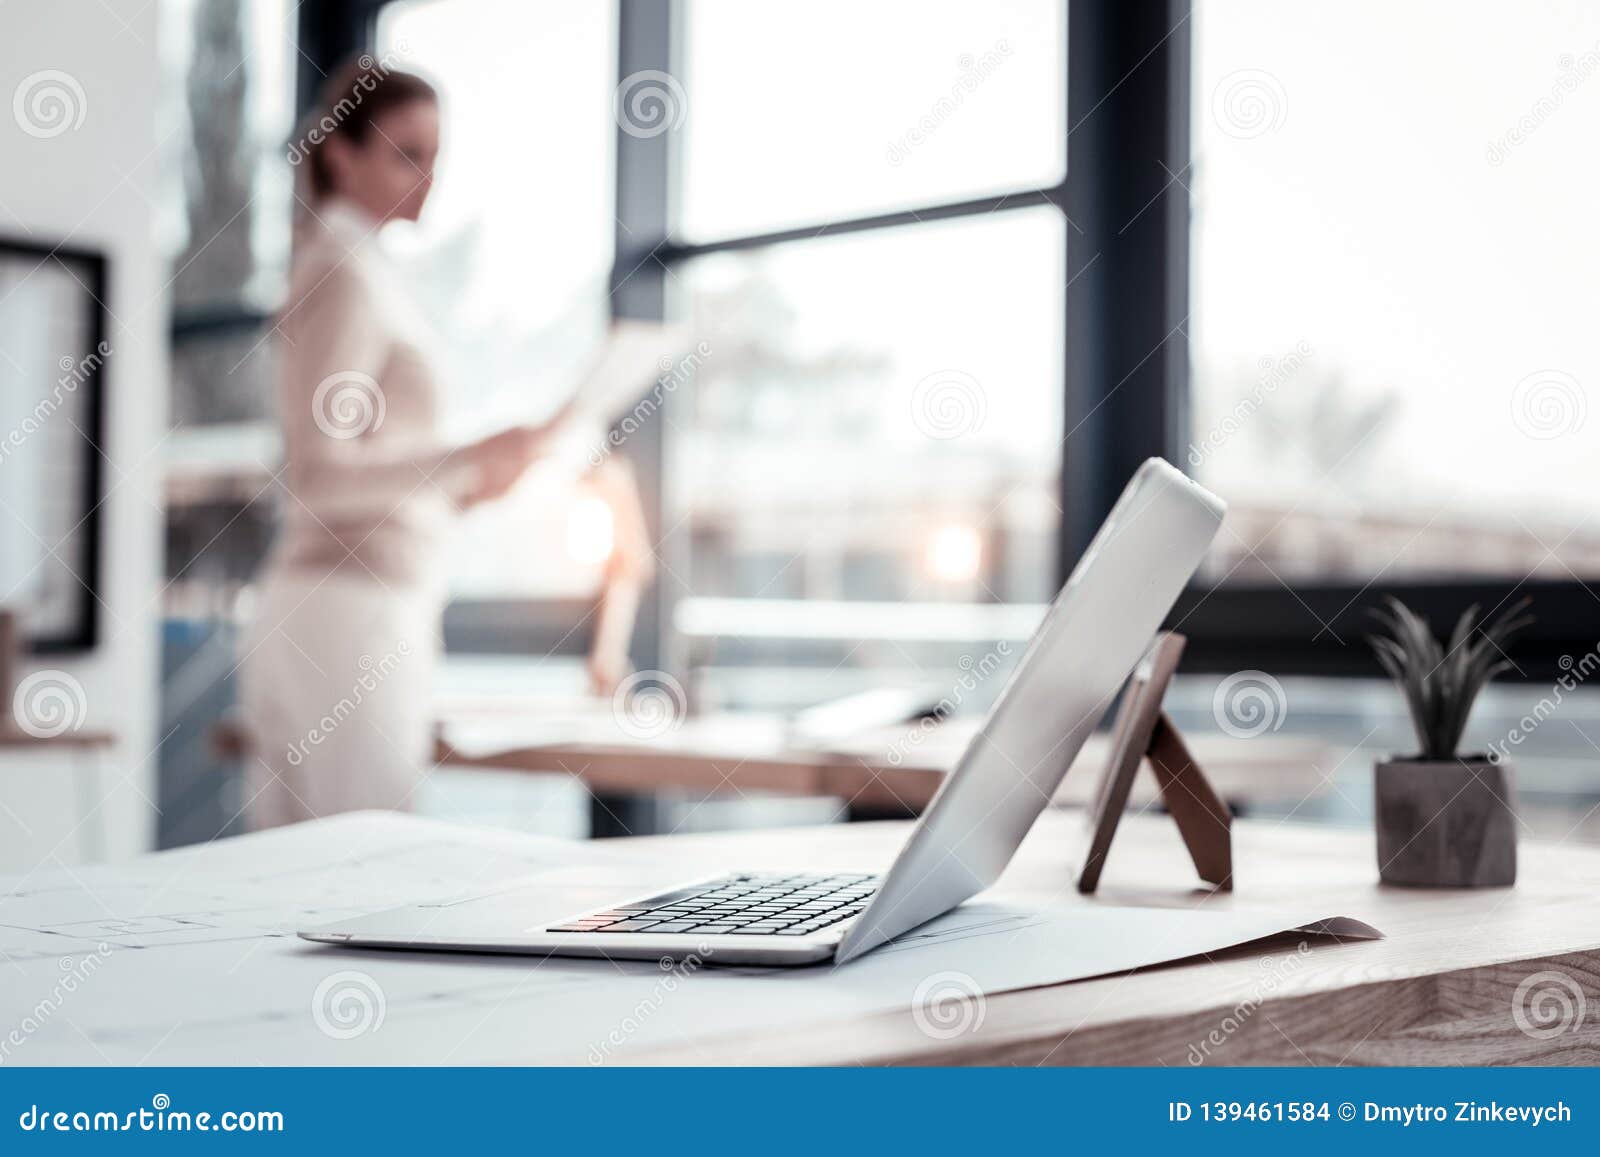 industrious clever businesswoman heading to her laptop having new idea